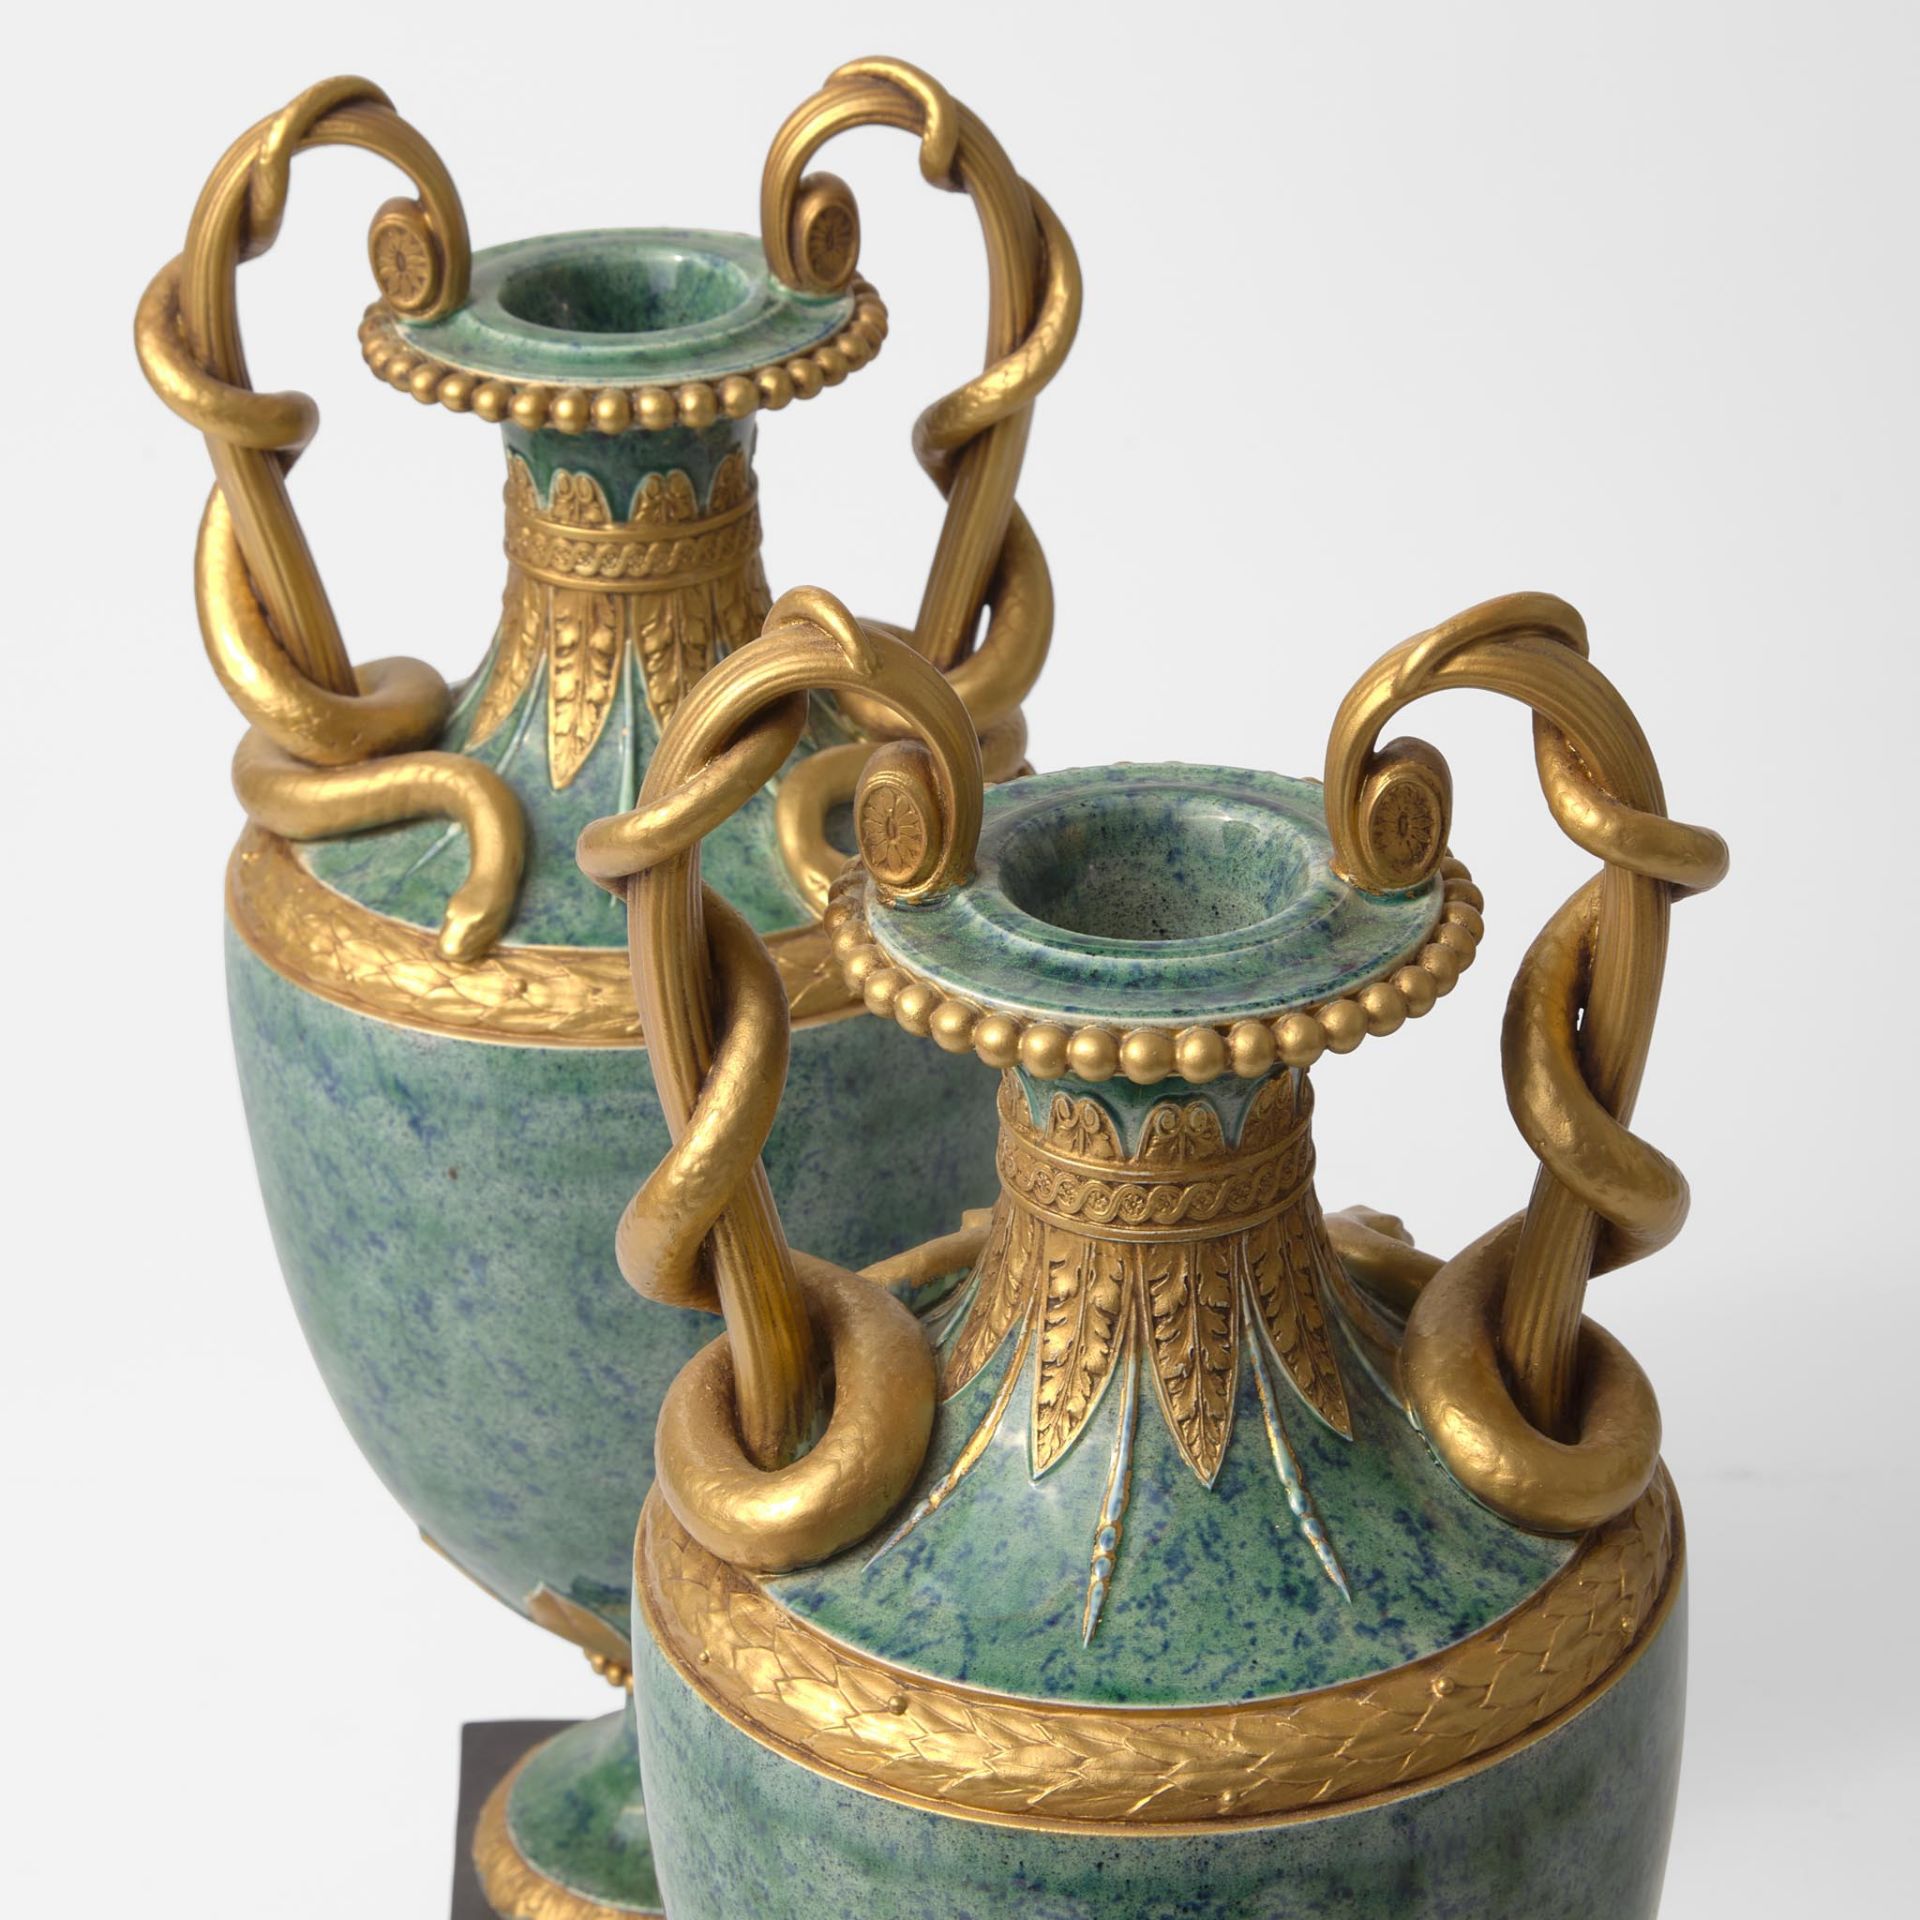 A Pair of Wedgwood Simulated Porphyry Snake-Handled Vases UK, circa 1790 - Image 2 of 3